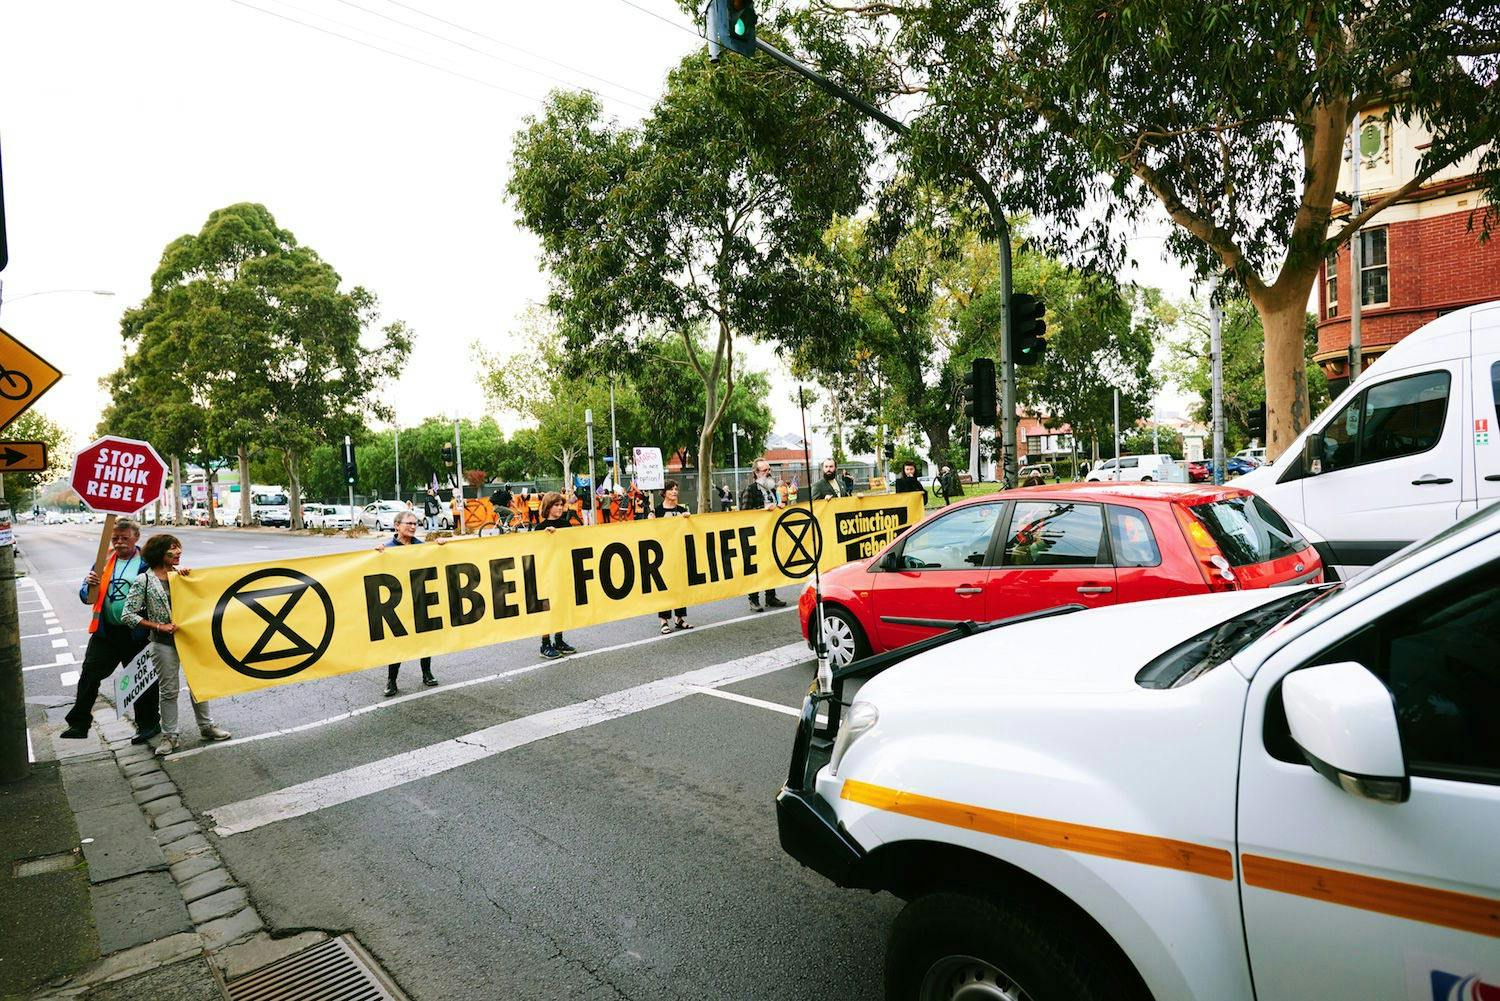 Photograph of activists holding a banner across the road, which reads: “Rebel for life”.